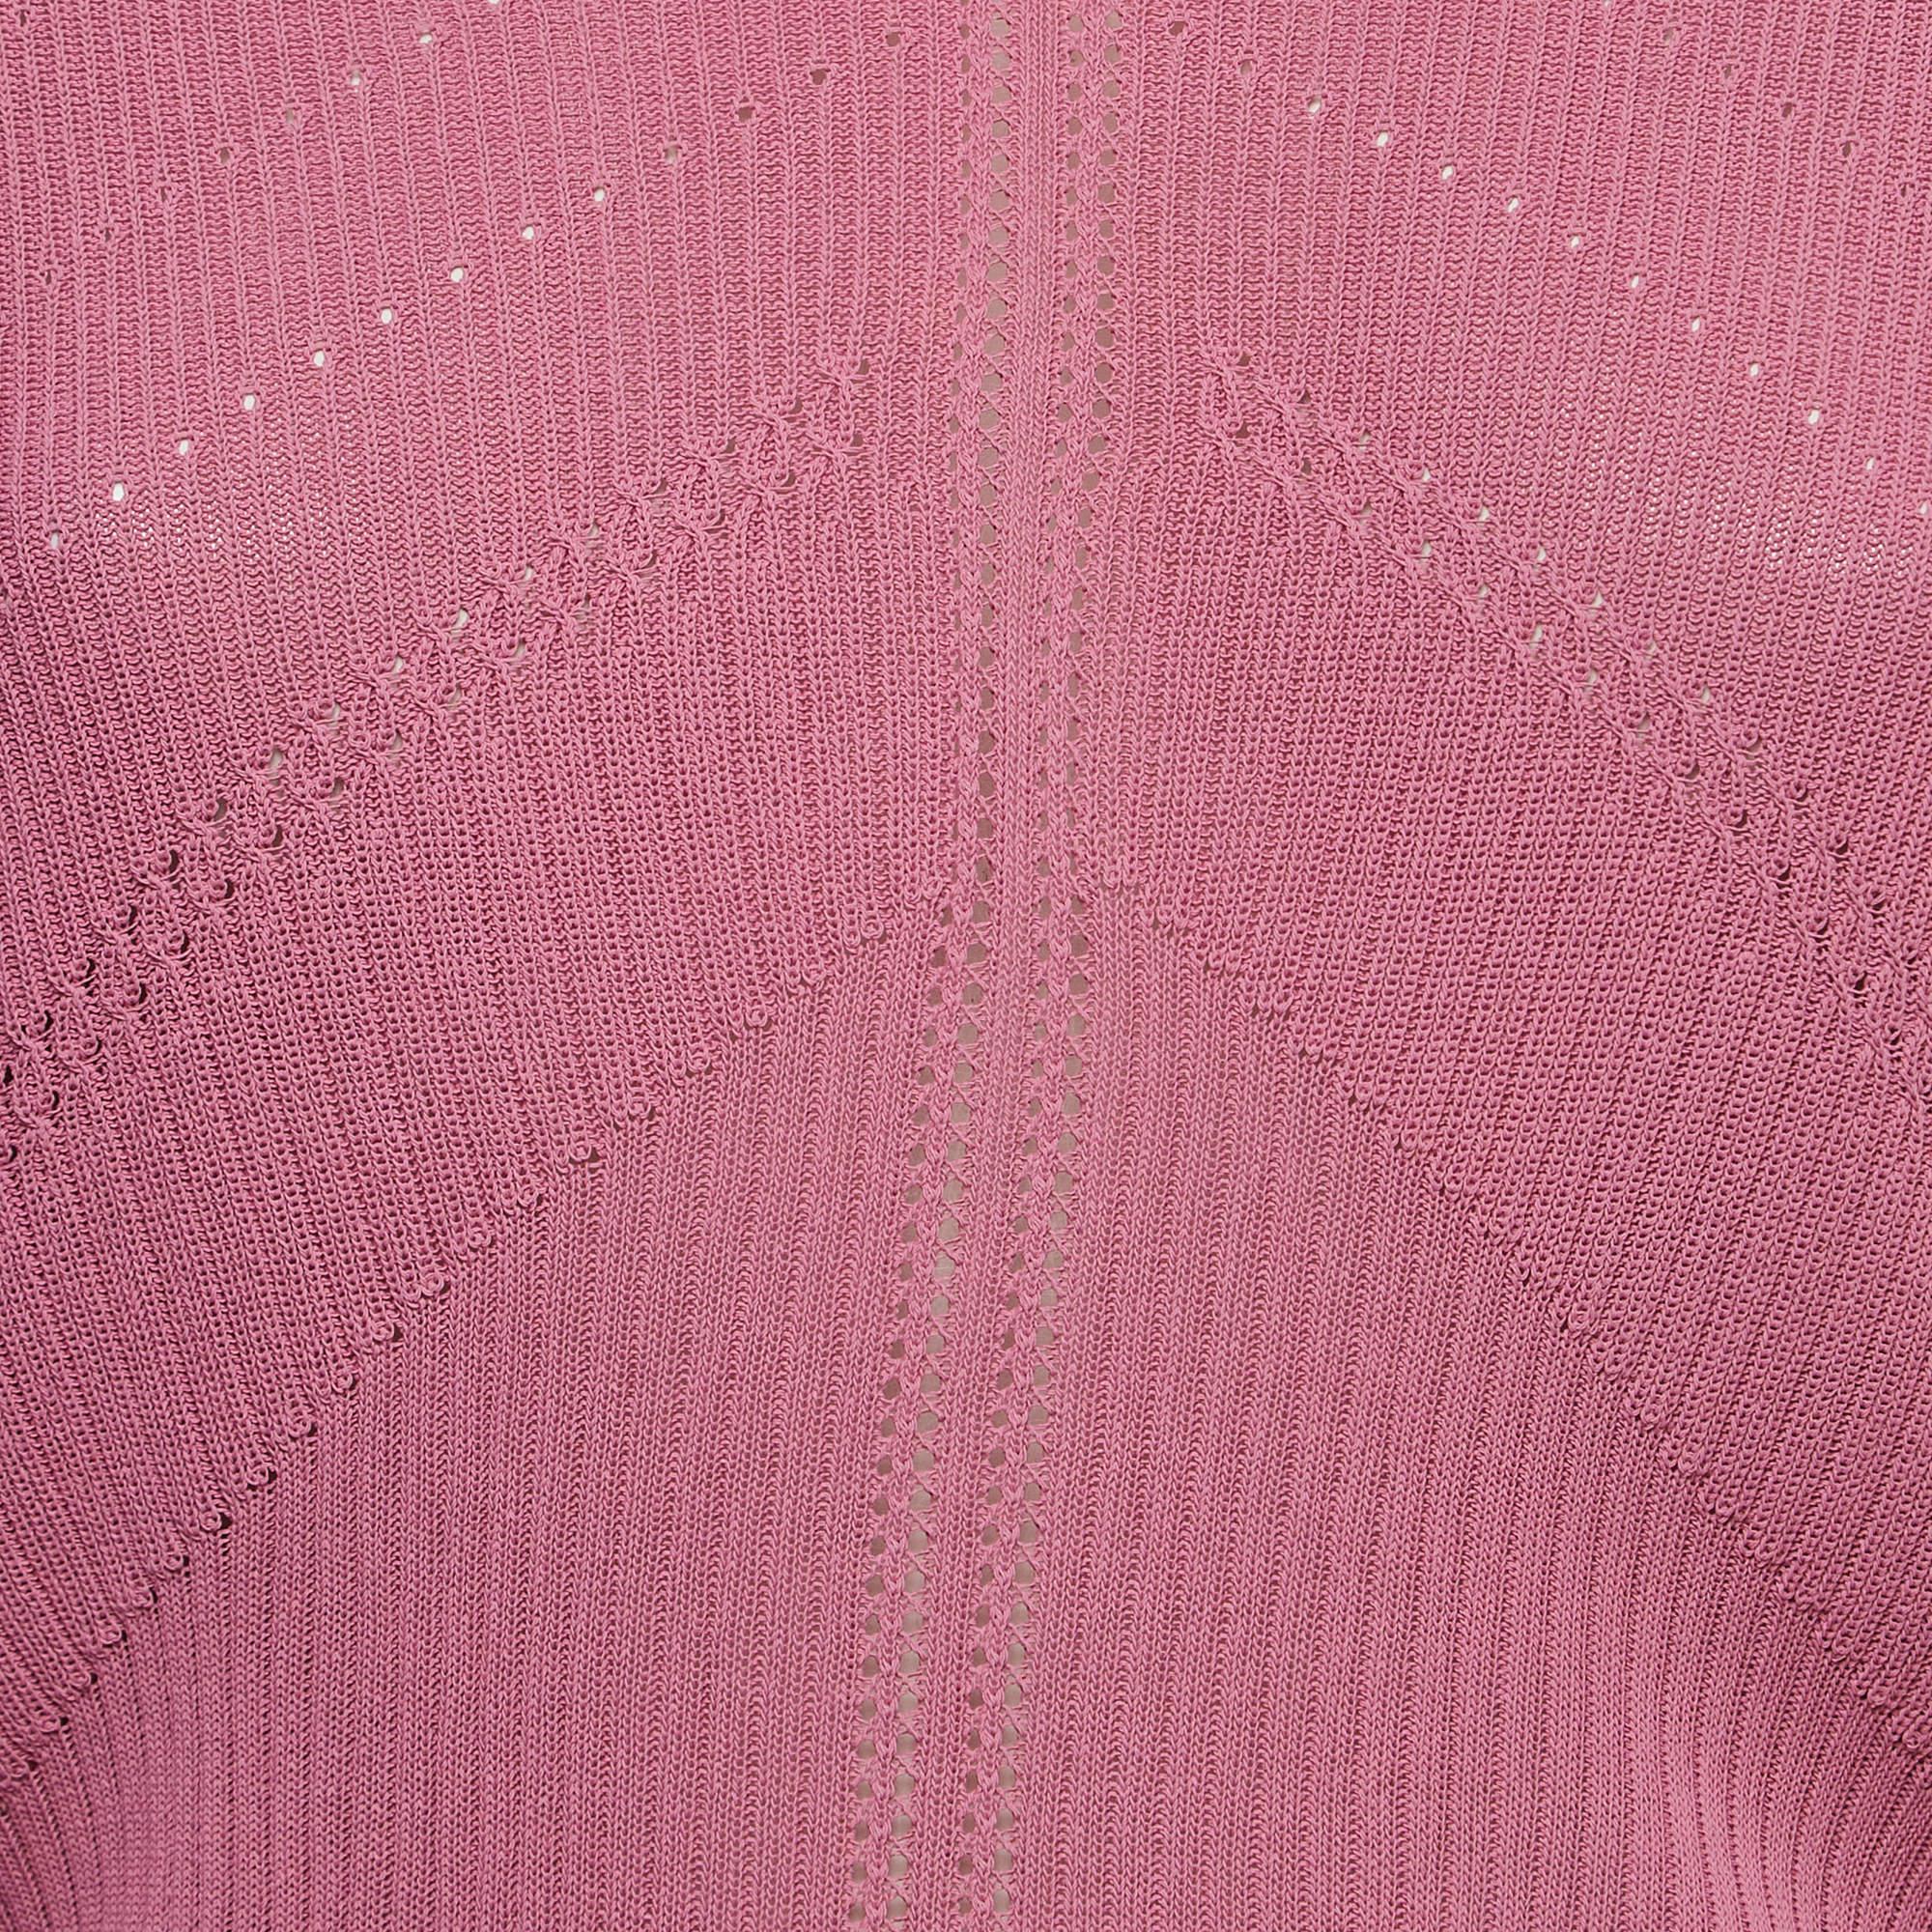 Dior Vintage Pink Perforated Knit Long Sleeve Top S 1